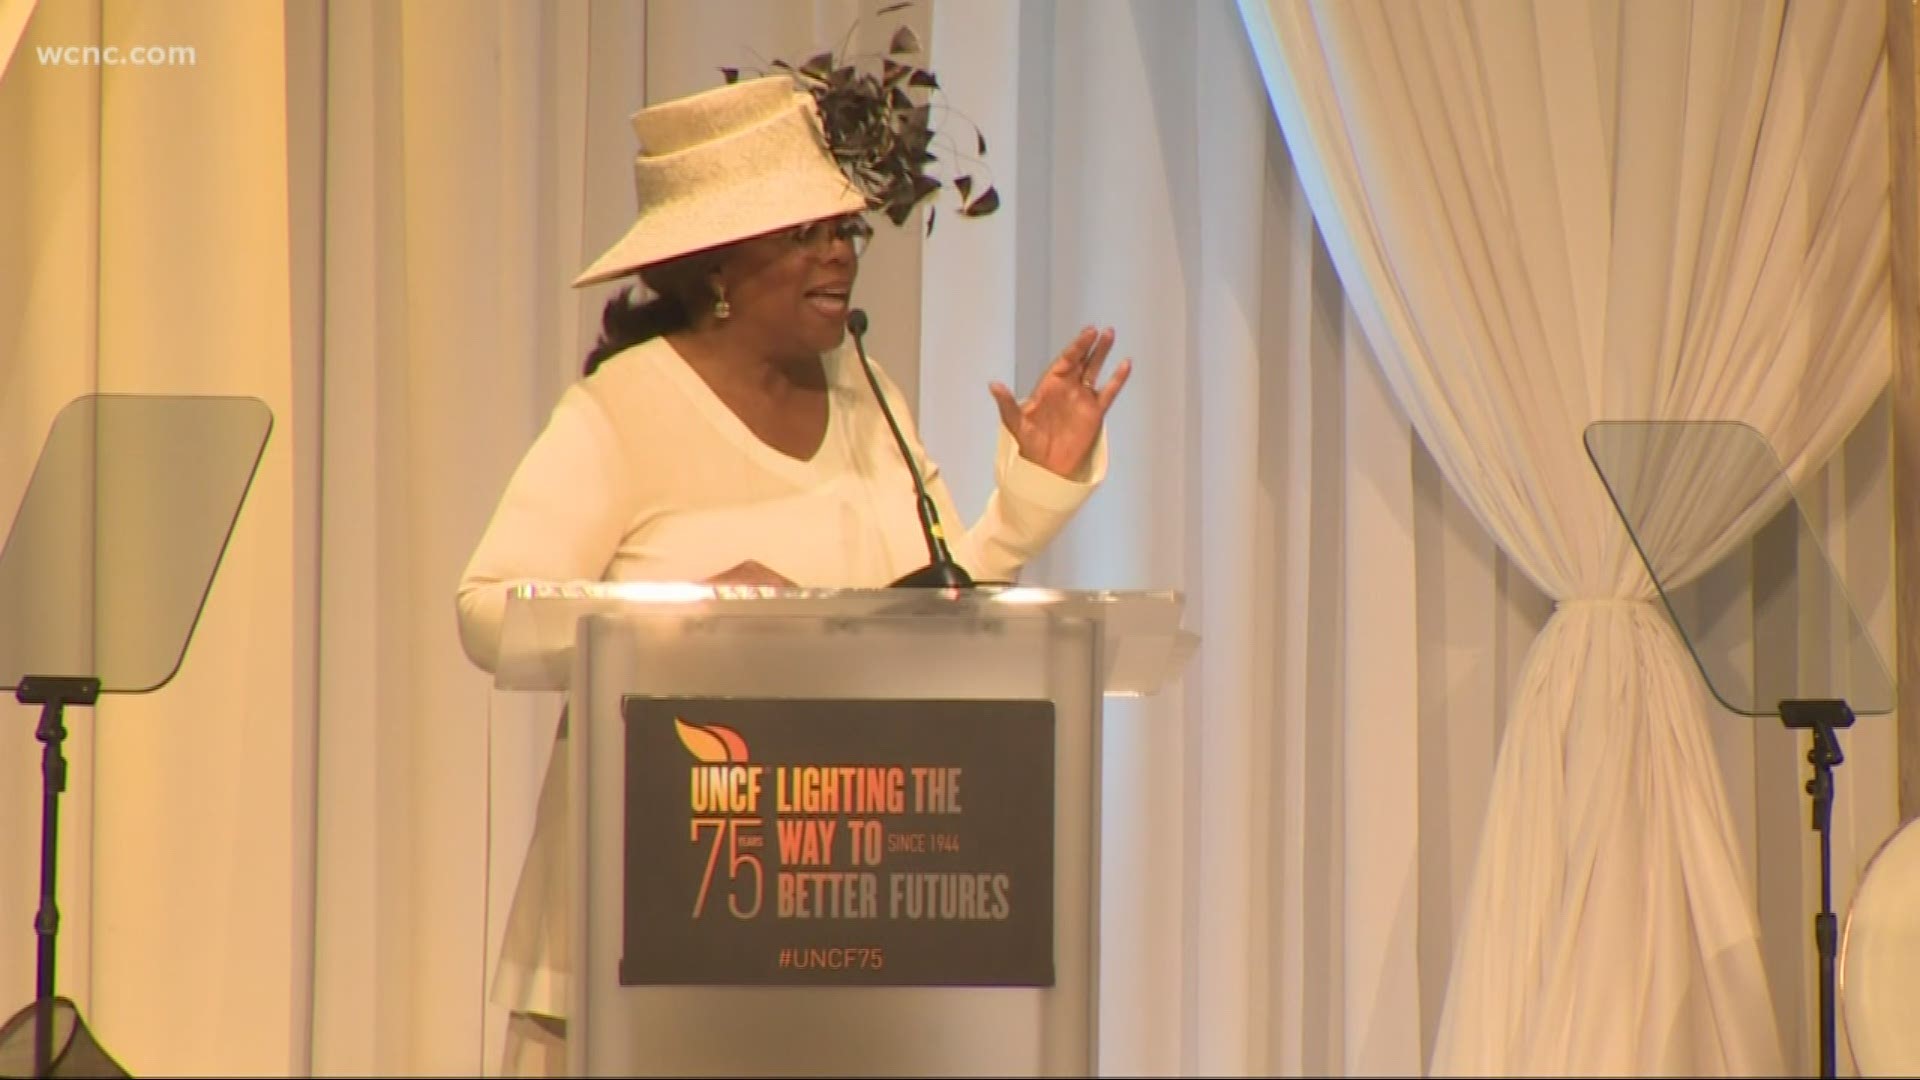 Oprah matched the already fundraised amount: $1,149,950. The event is hosted every year by the UNCF.